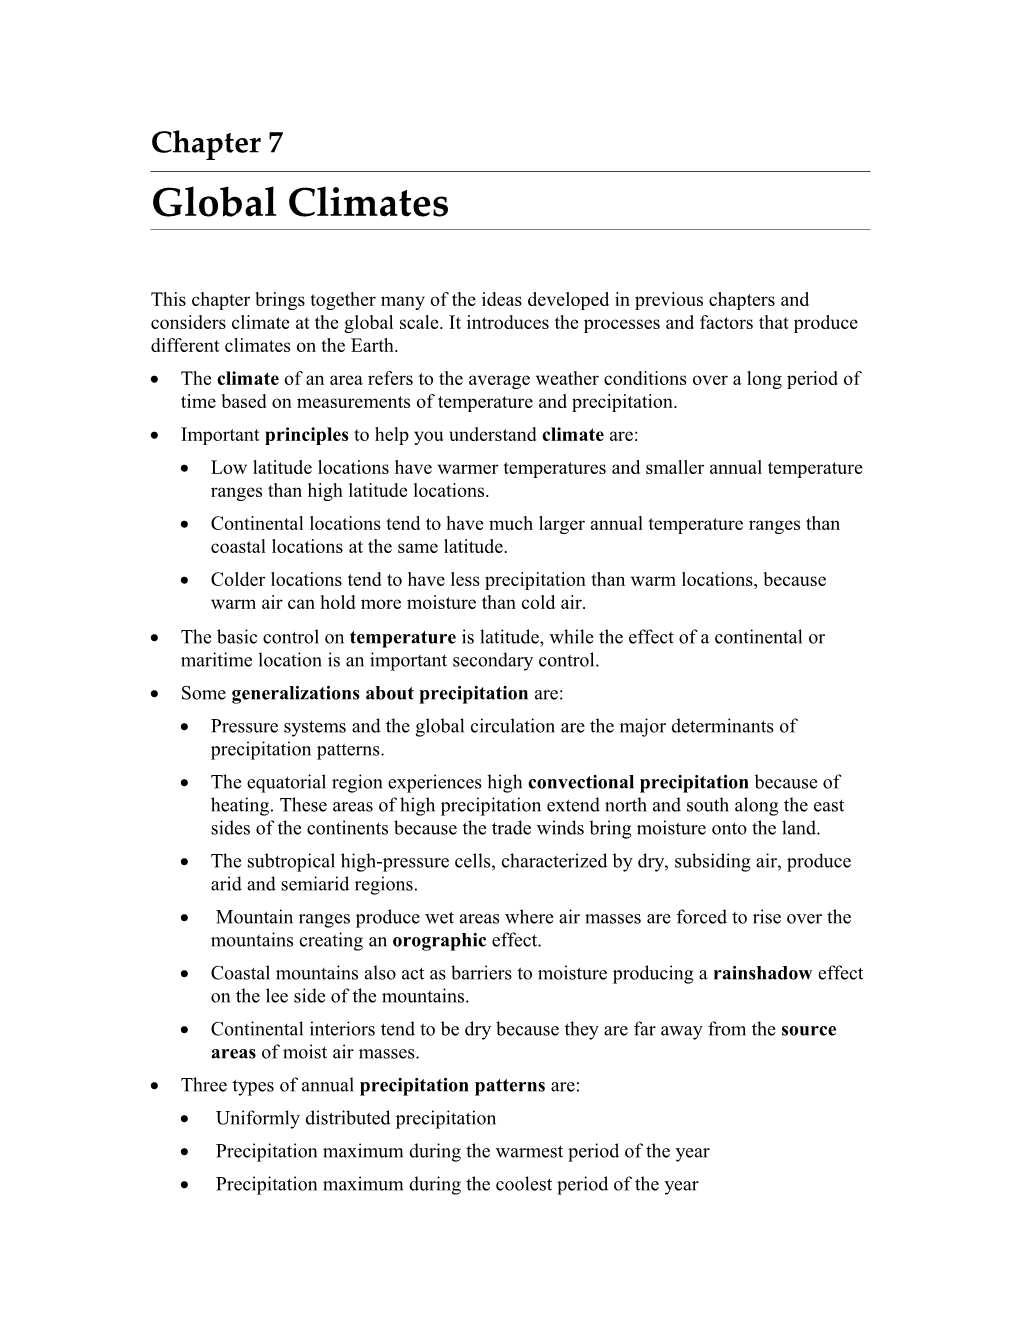 Important Principles to Help You Understand Climate Are